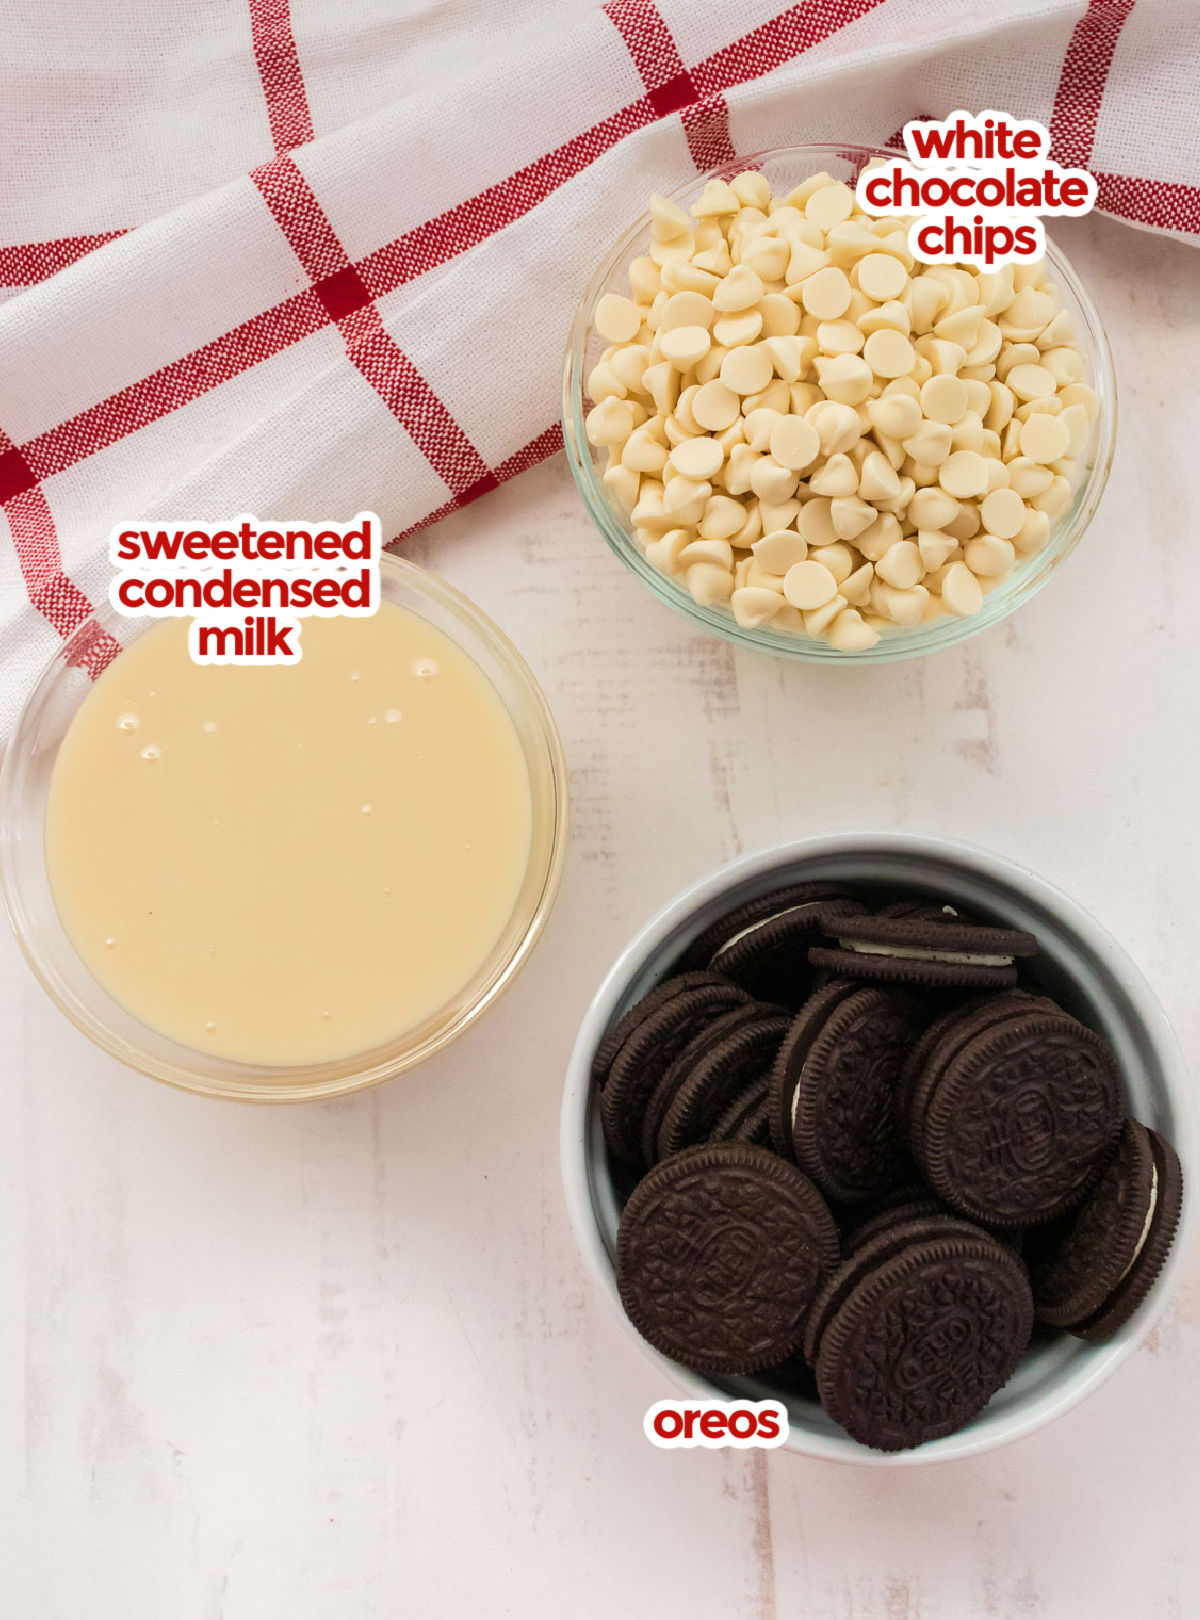 All the ingredients you will need to make Oreo Fudge including White Chocolate Chips, Sweetened Condensed Milk and Oreo Cookies.